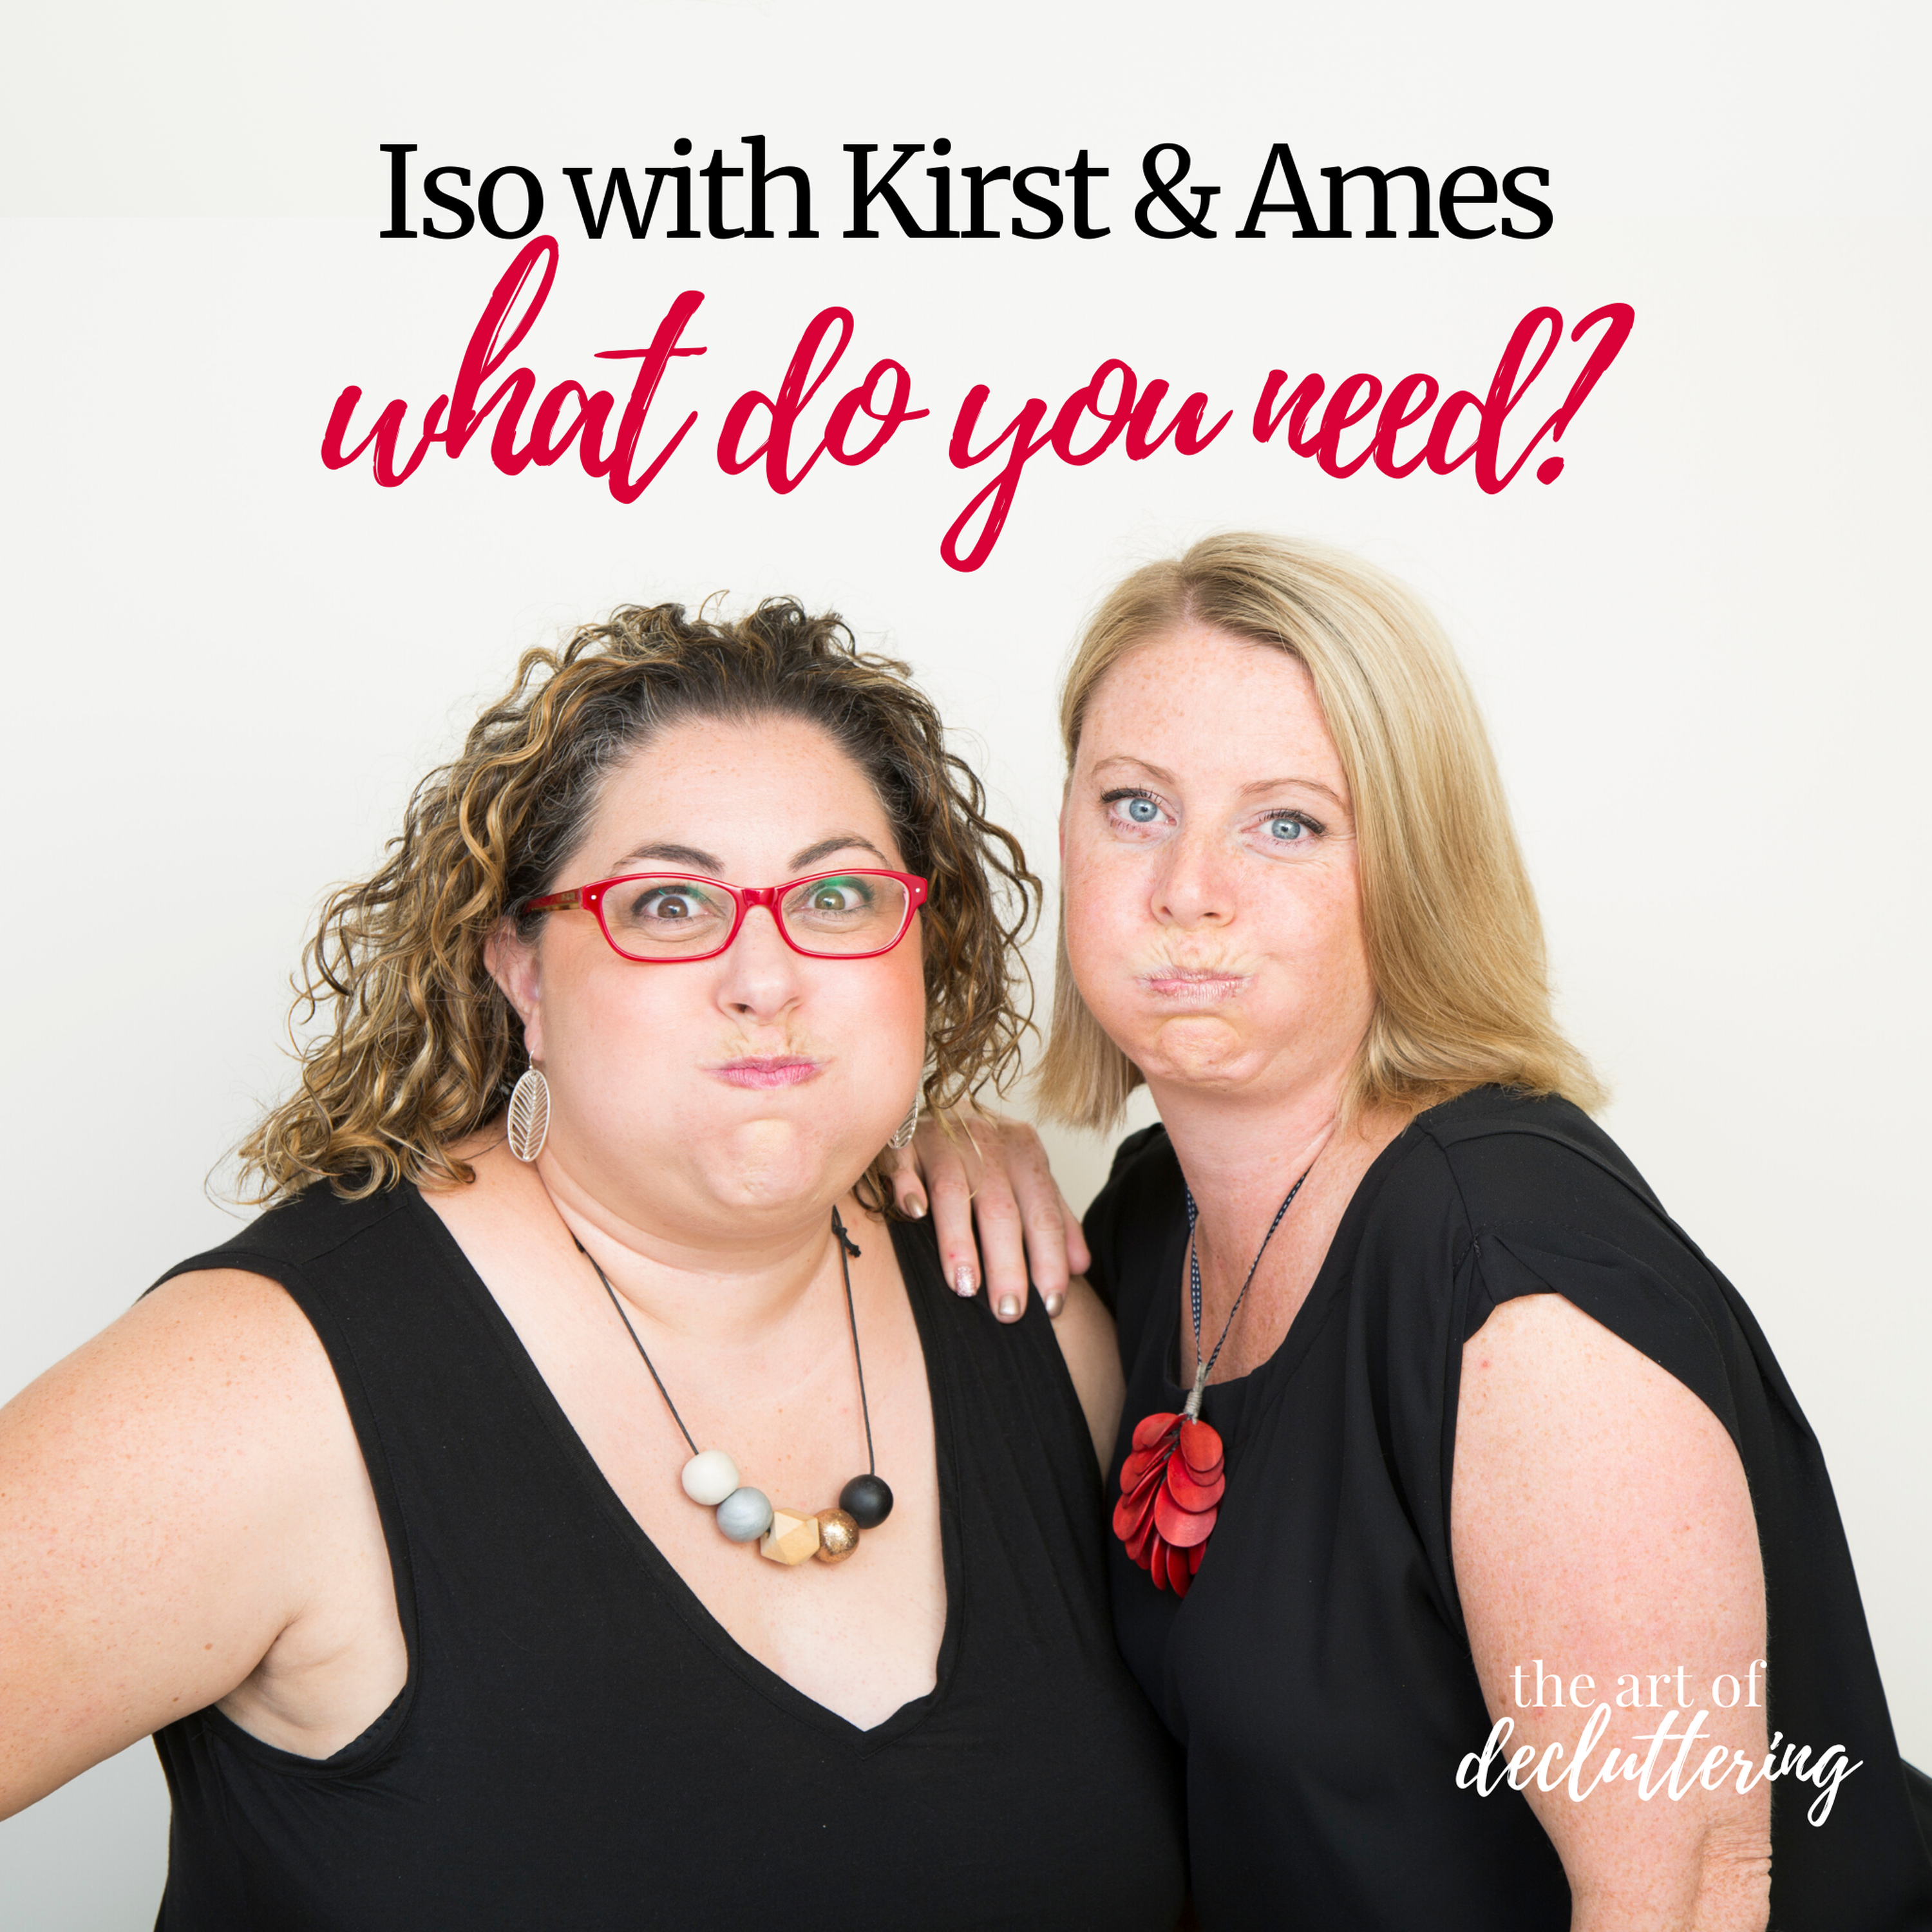 Iso with Kirst & Ames - What do you need?